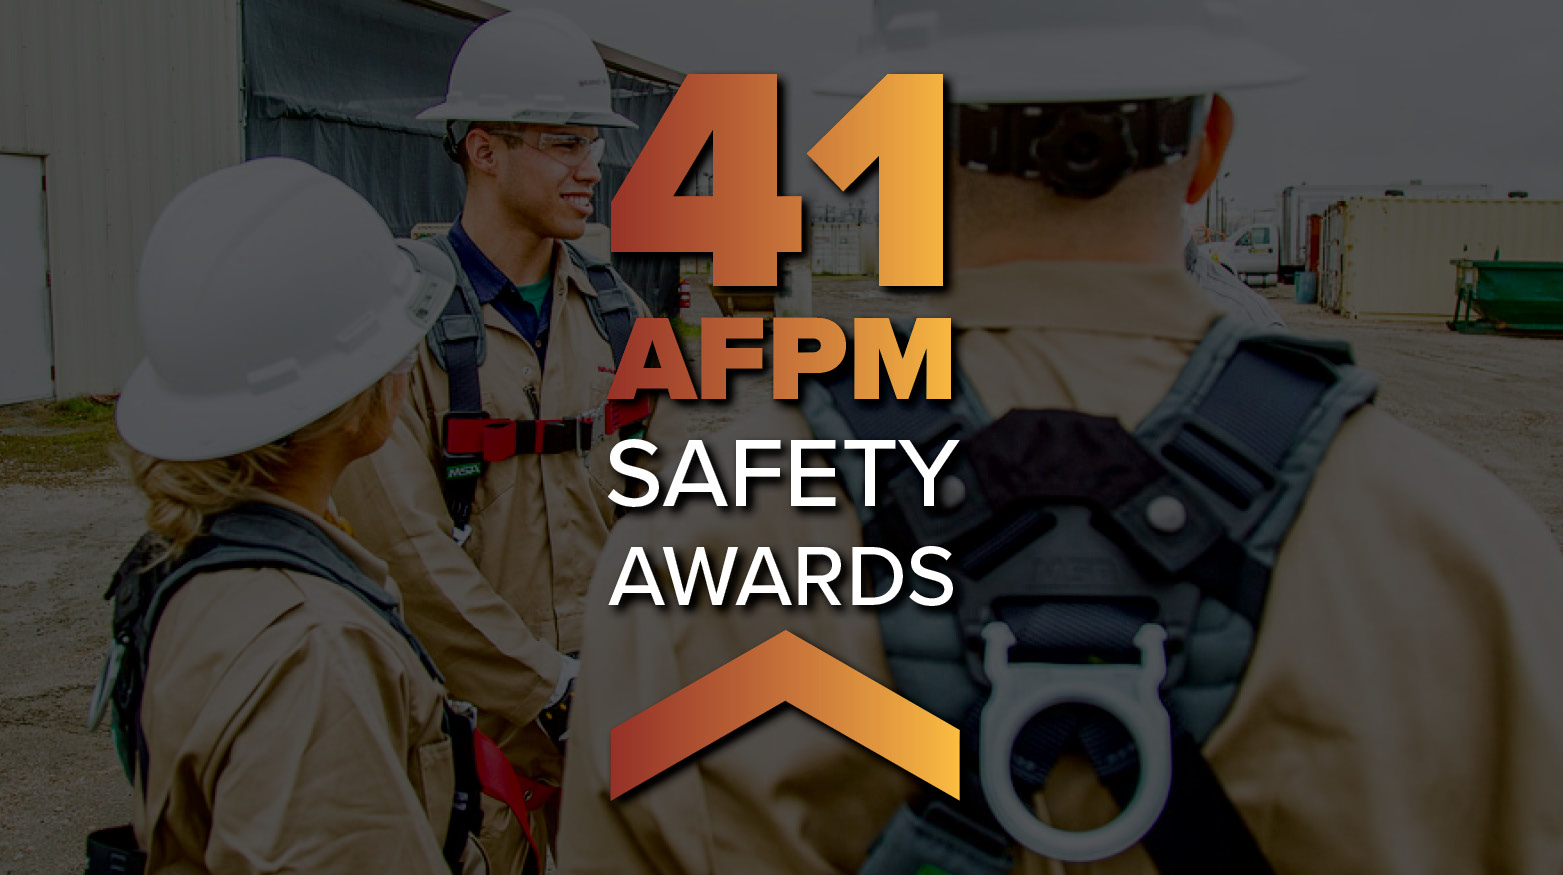 With a commitment to leading the industry in safety excellence, 41 BrandSafway refinery and petrochemical plant site teams received Contractor Safety Achievement Awards from the American Fuel & Petrochemical Manufacturers (AFPM) association based on their safety performance in 2020.